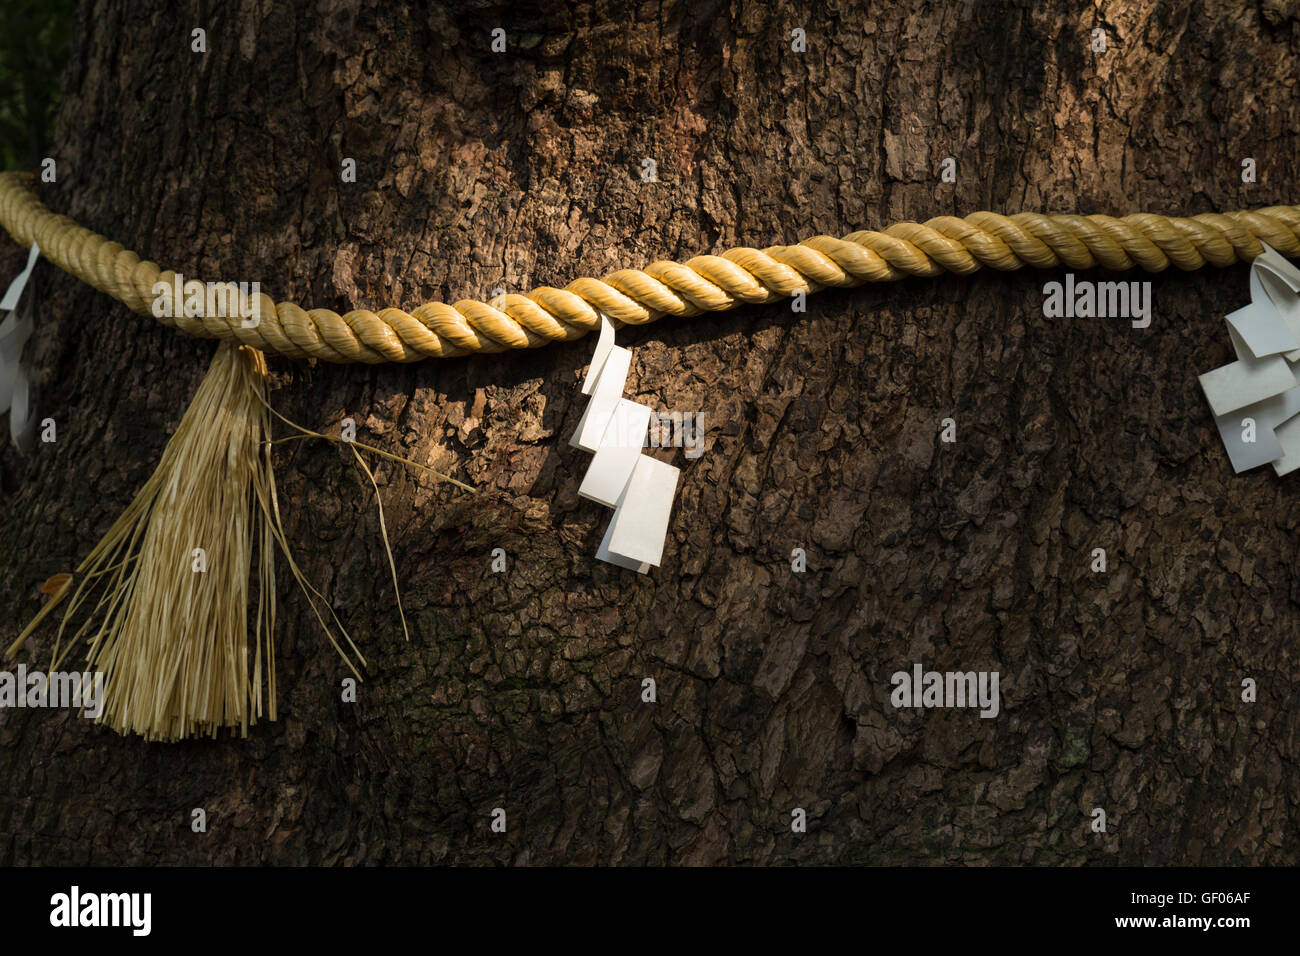 Folded paper symbols on a rope of rice straw bound around a mighty tree at a Shinto shrine in Japan Stock Photo